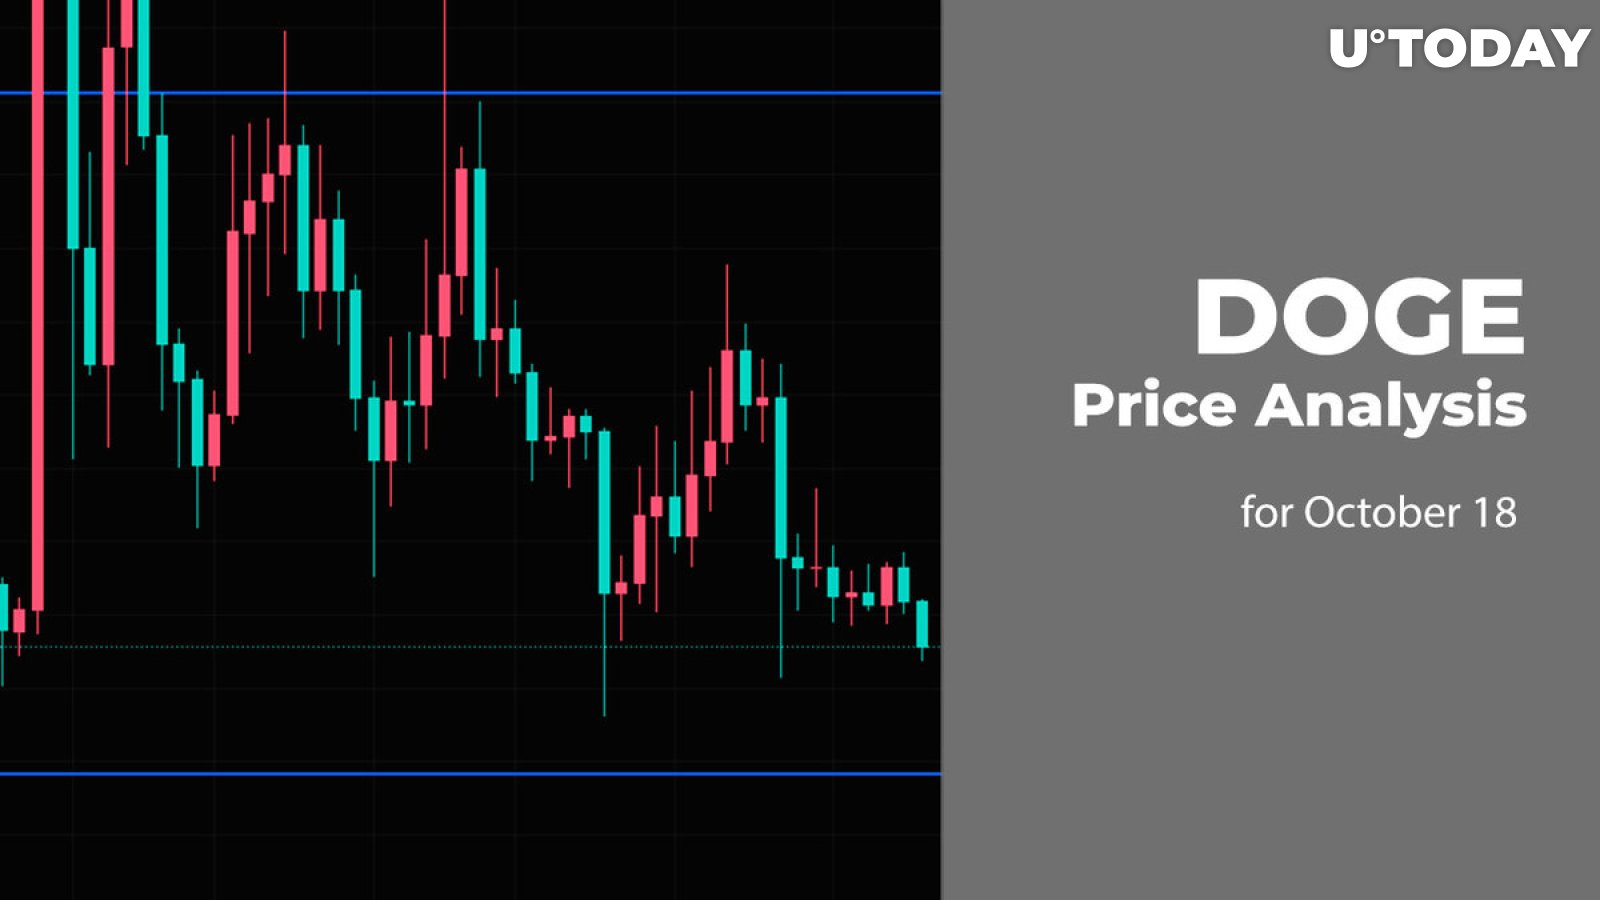 DOGE Price Analysis for October 18